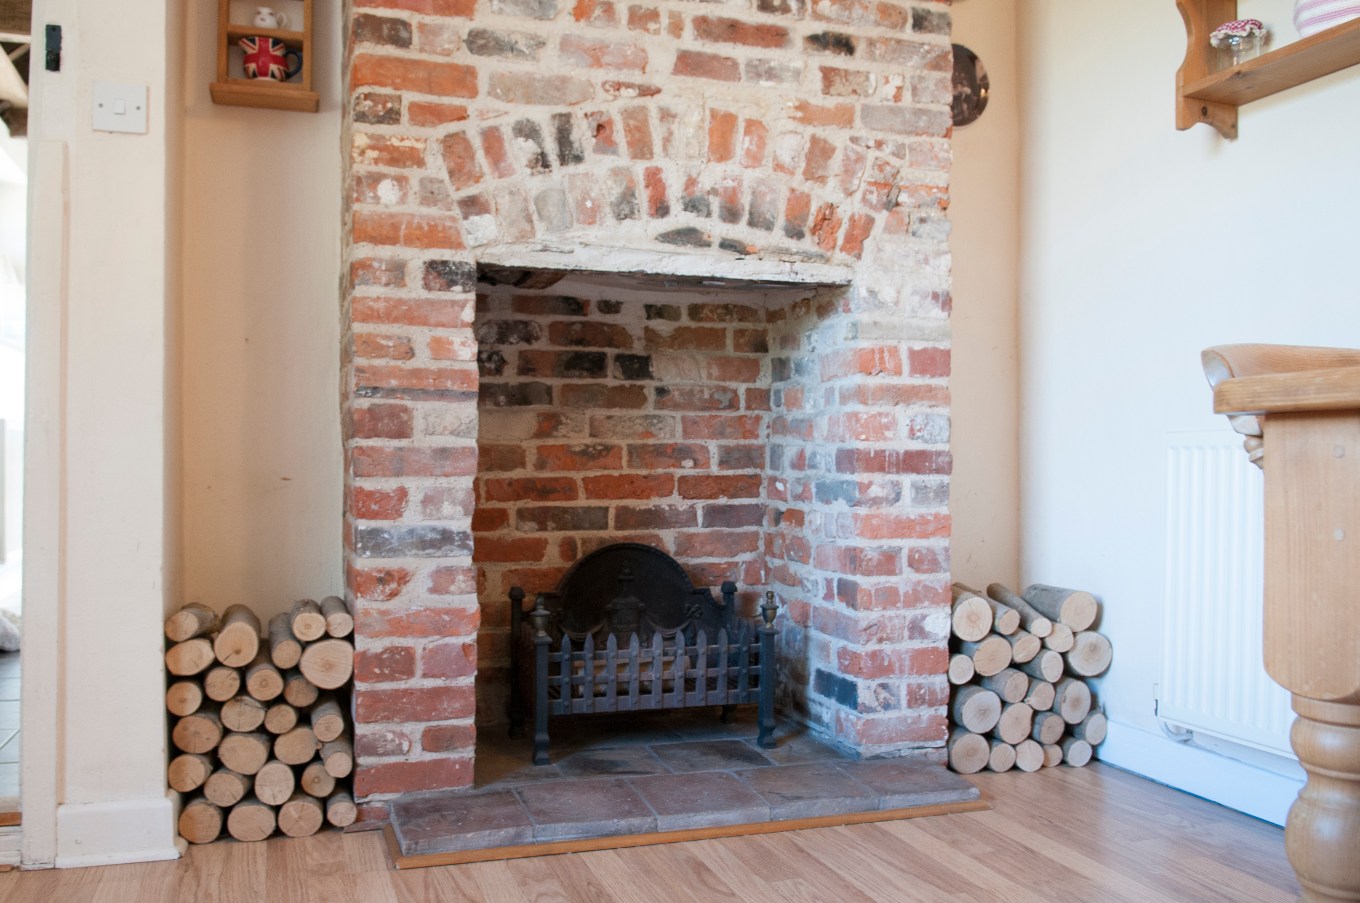 A view of a wrought iron grate in a bare brick, rustic fireplace with chopped logs stacked up to the sides.